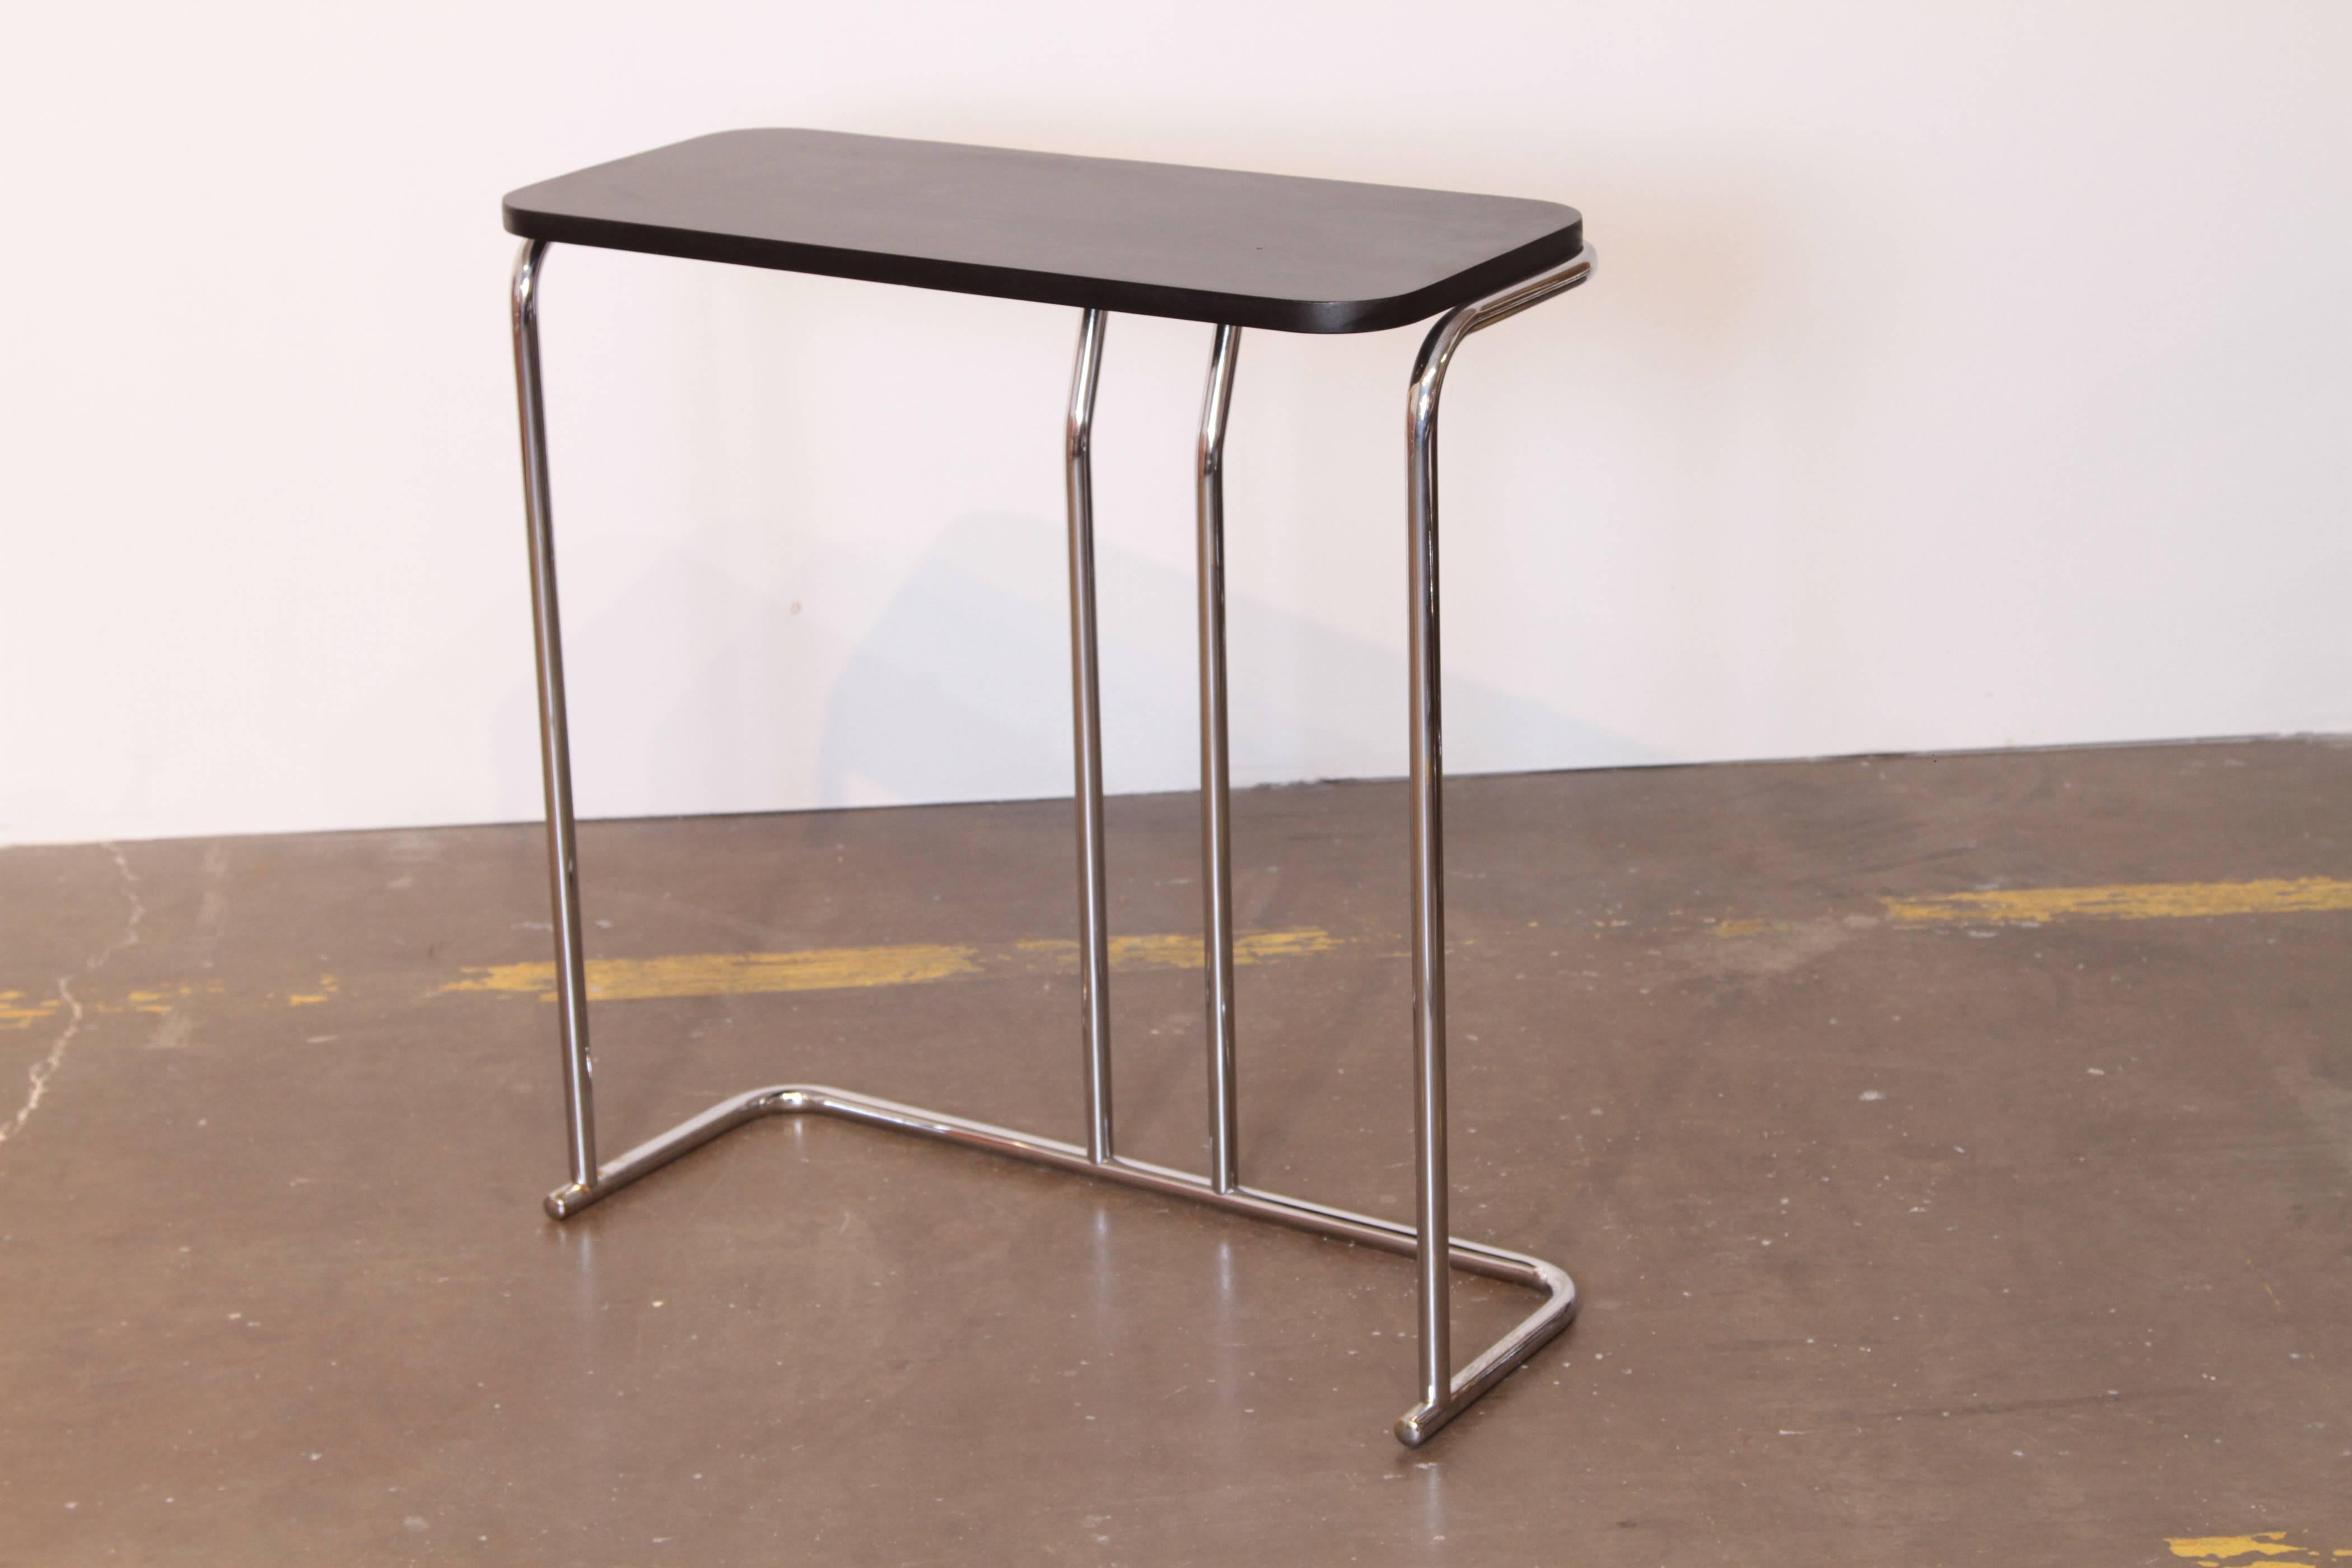 Art Deco Machine Age Wolfgang Hoffmann for Howell rare console table

Iconic and rare non - mirrored table by Hoffmann Hoffman for Howell Chromsteel Chrome Steel
Minty restored version.
Howell modern chrome steel furniture No. 479 Table, circa